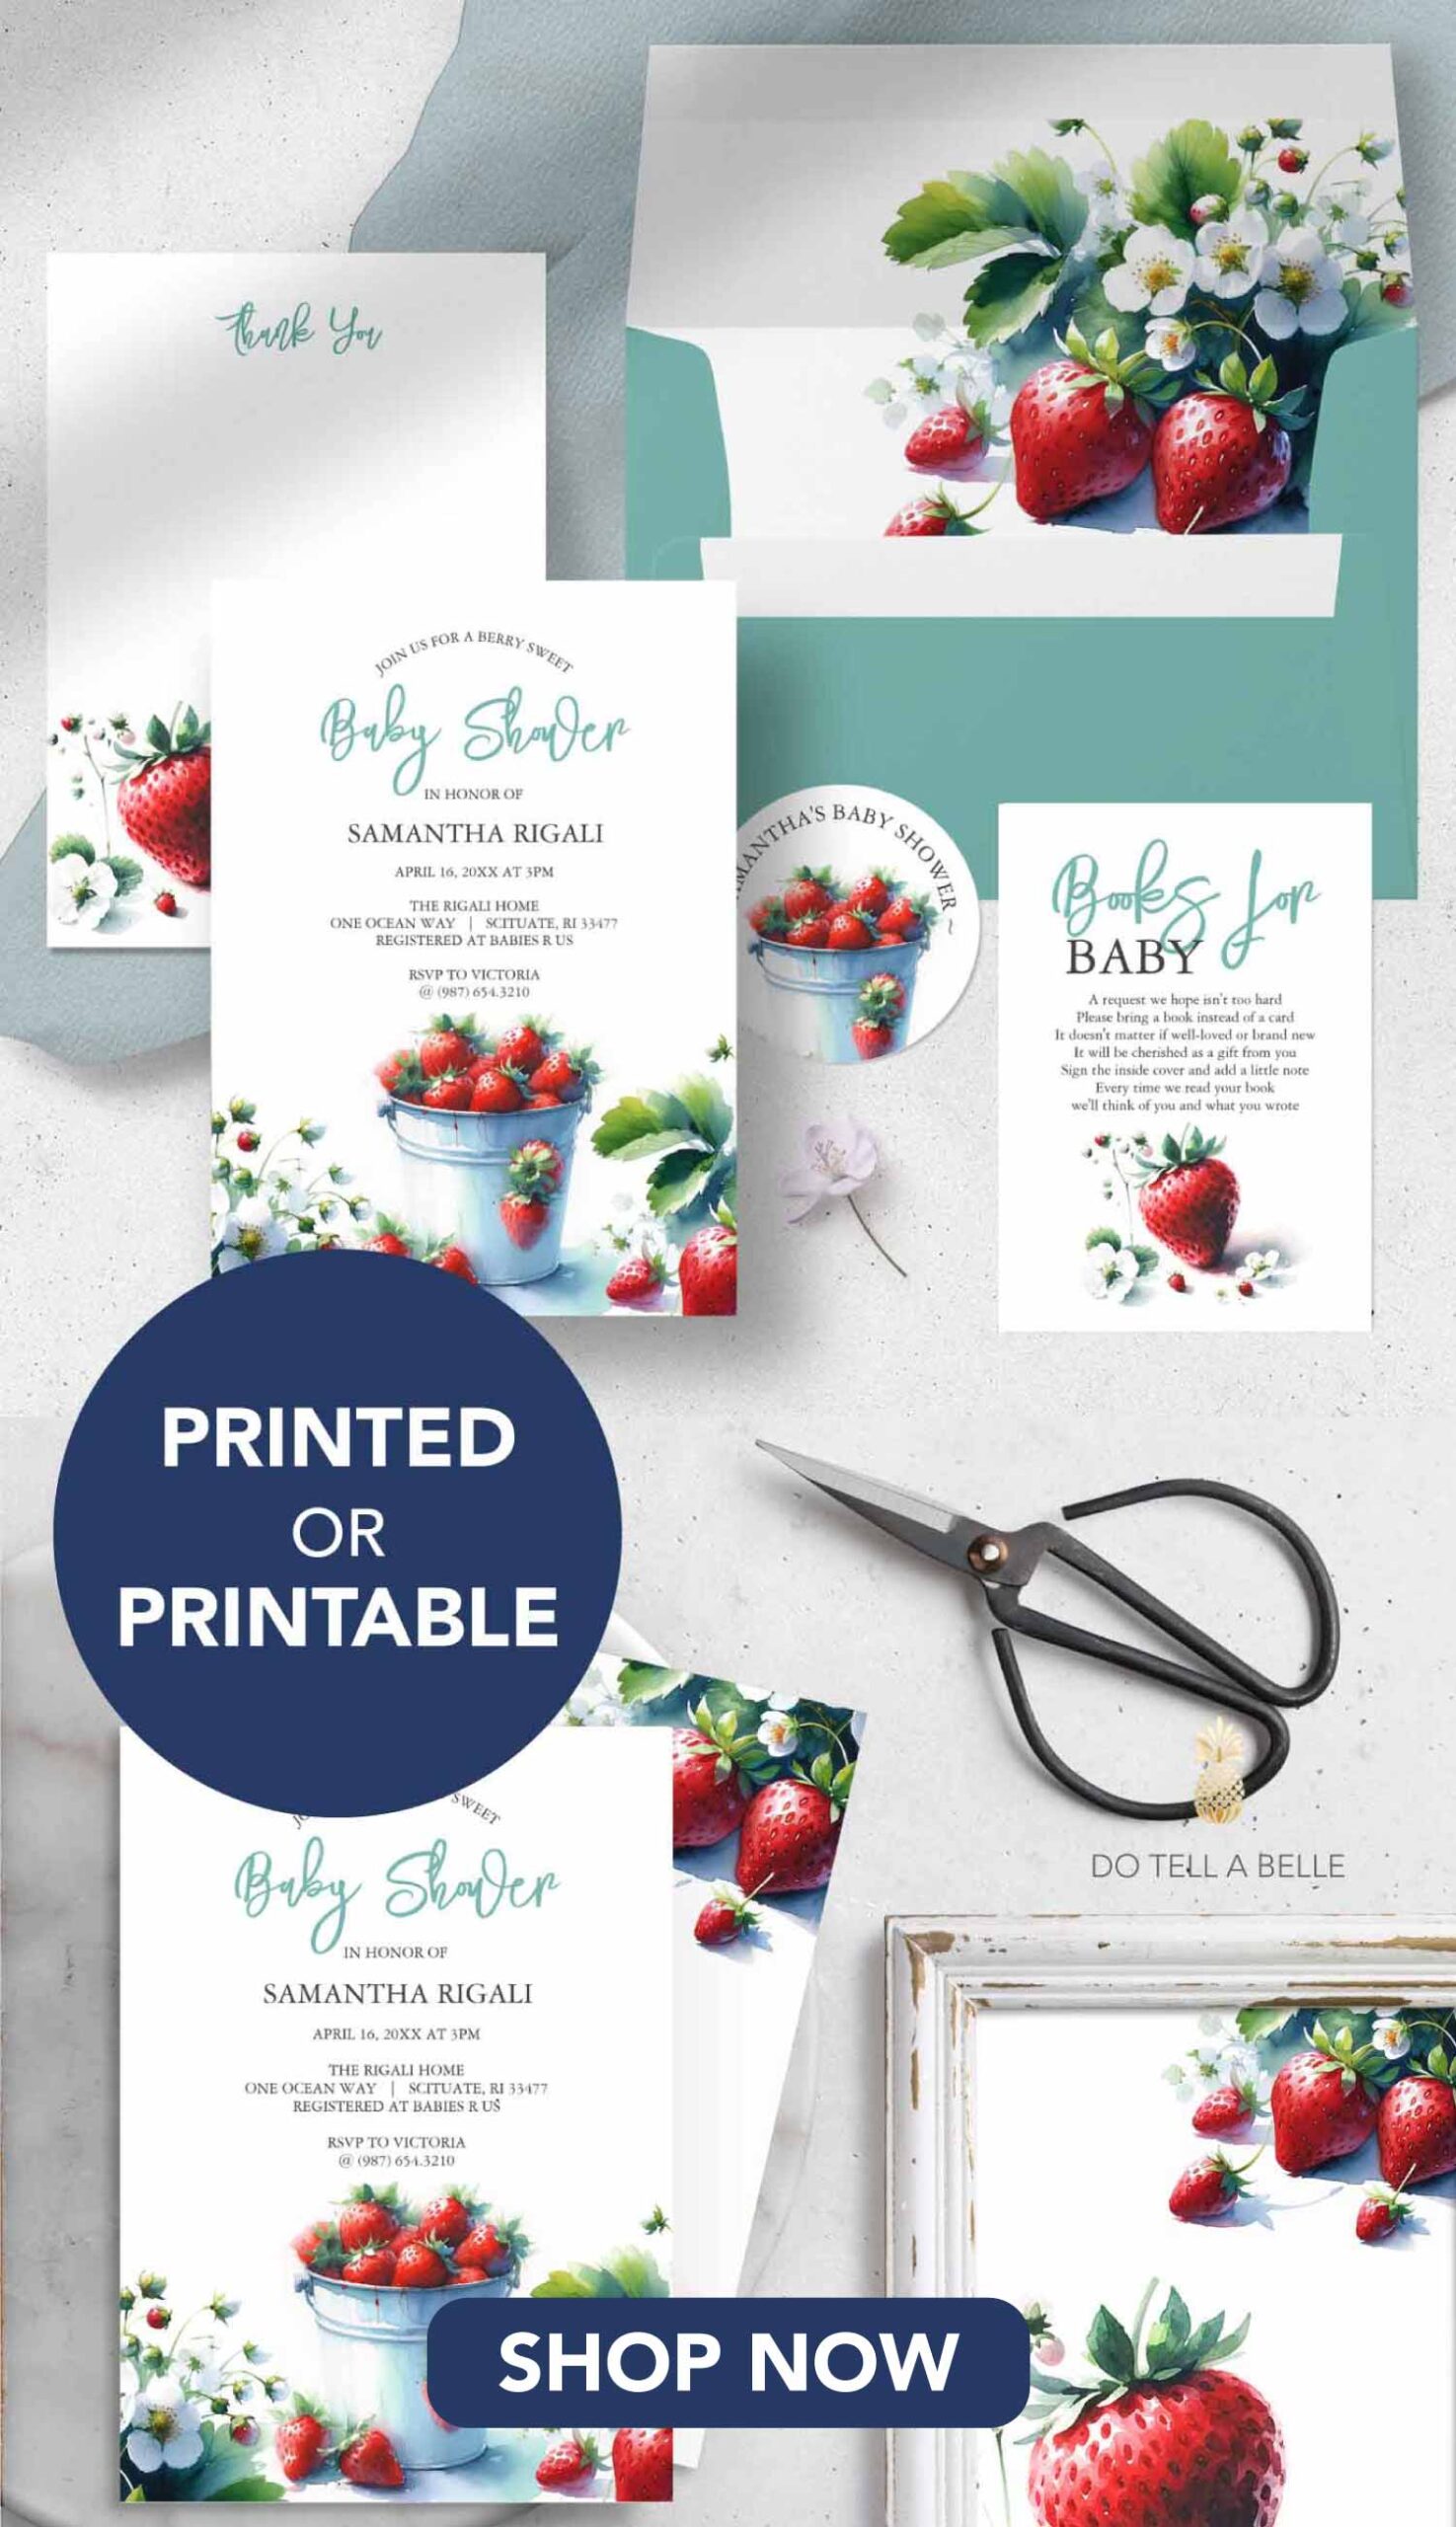 Berry sweet baby shower theme features watercolor strawberries invitations, book for baby card, sticker, thank you card and envelope. The cards revers to reveal strawberry art that can be framed. Order printed invitations or printable files. Click to shop.